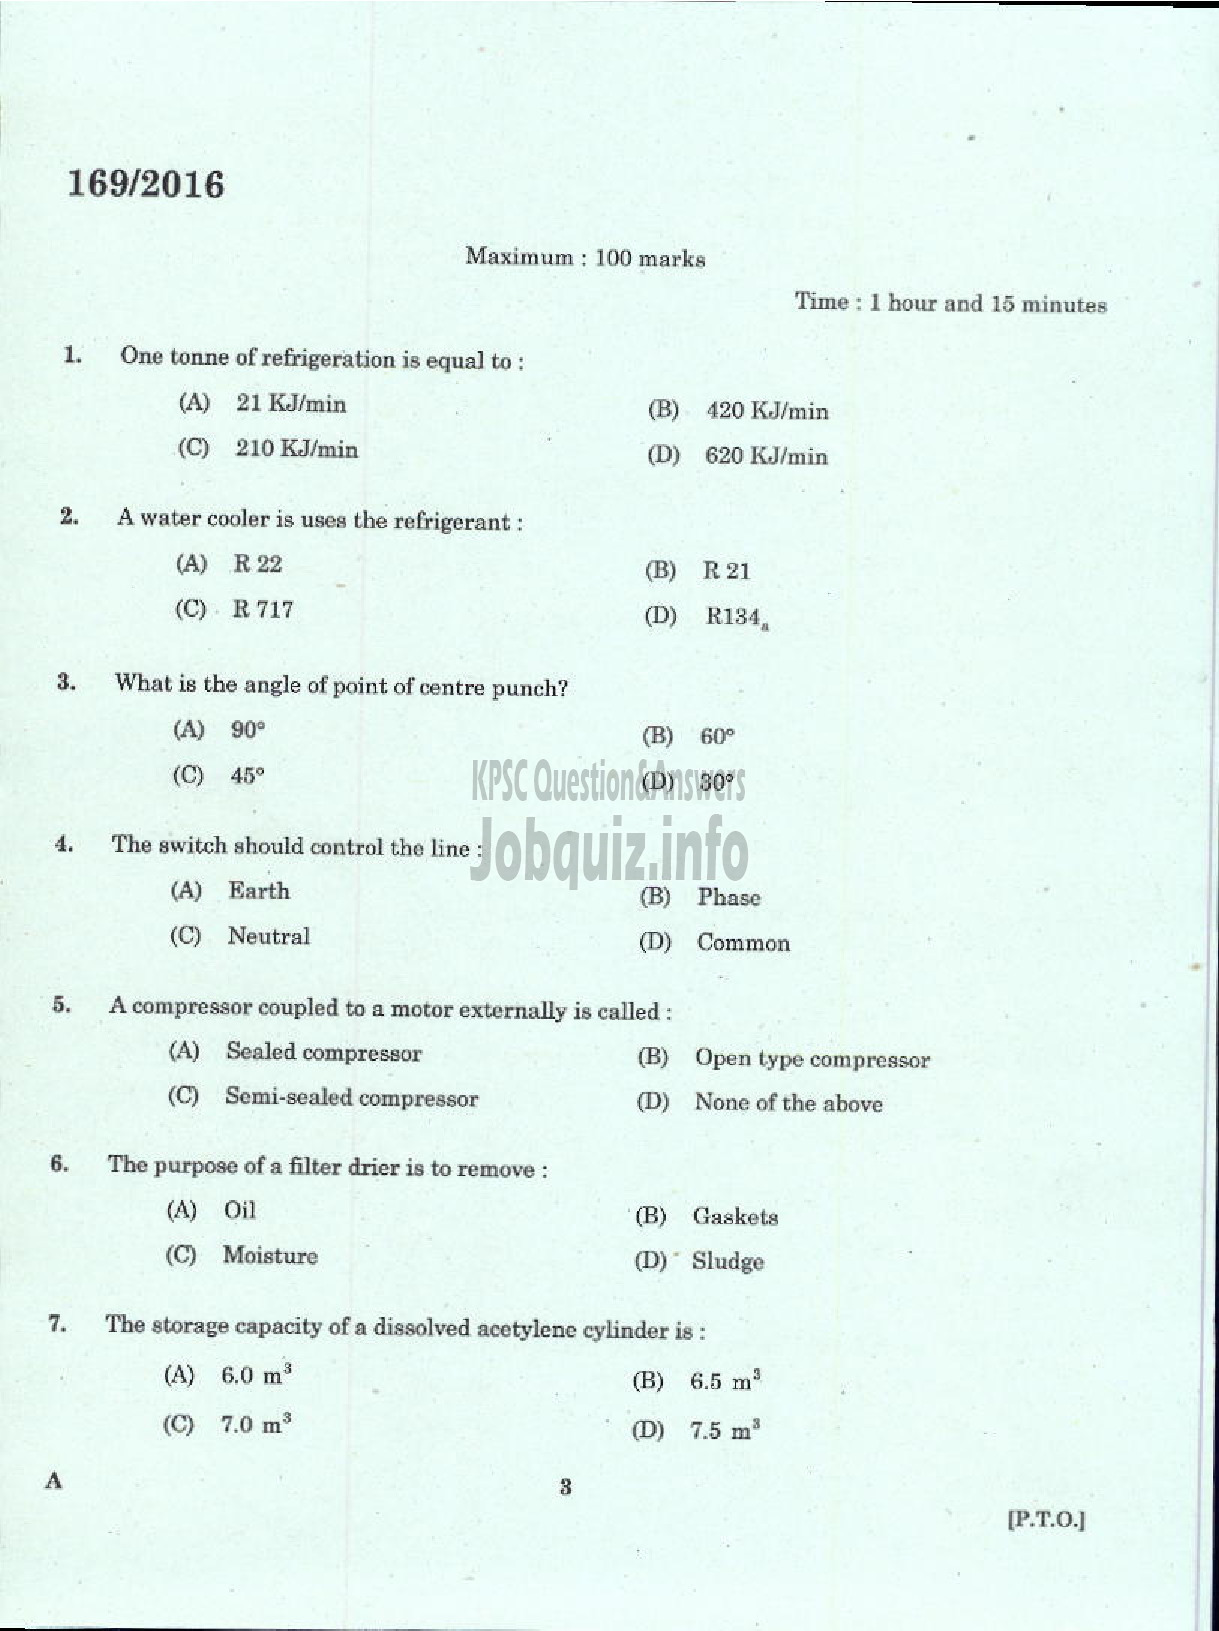 Kerala PSC Question Paper - TRADESMAN REFRIGERATION AND AIR CONDITIONING TECHNICAL EDUCATION-1